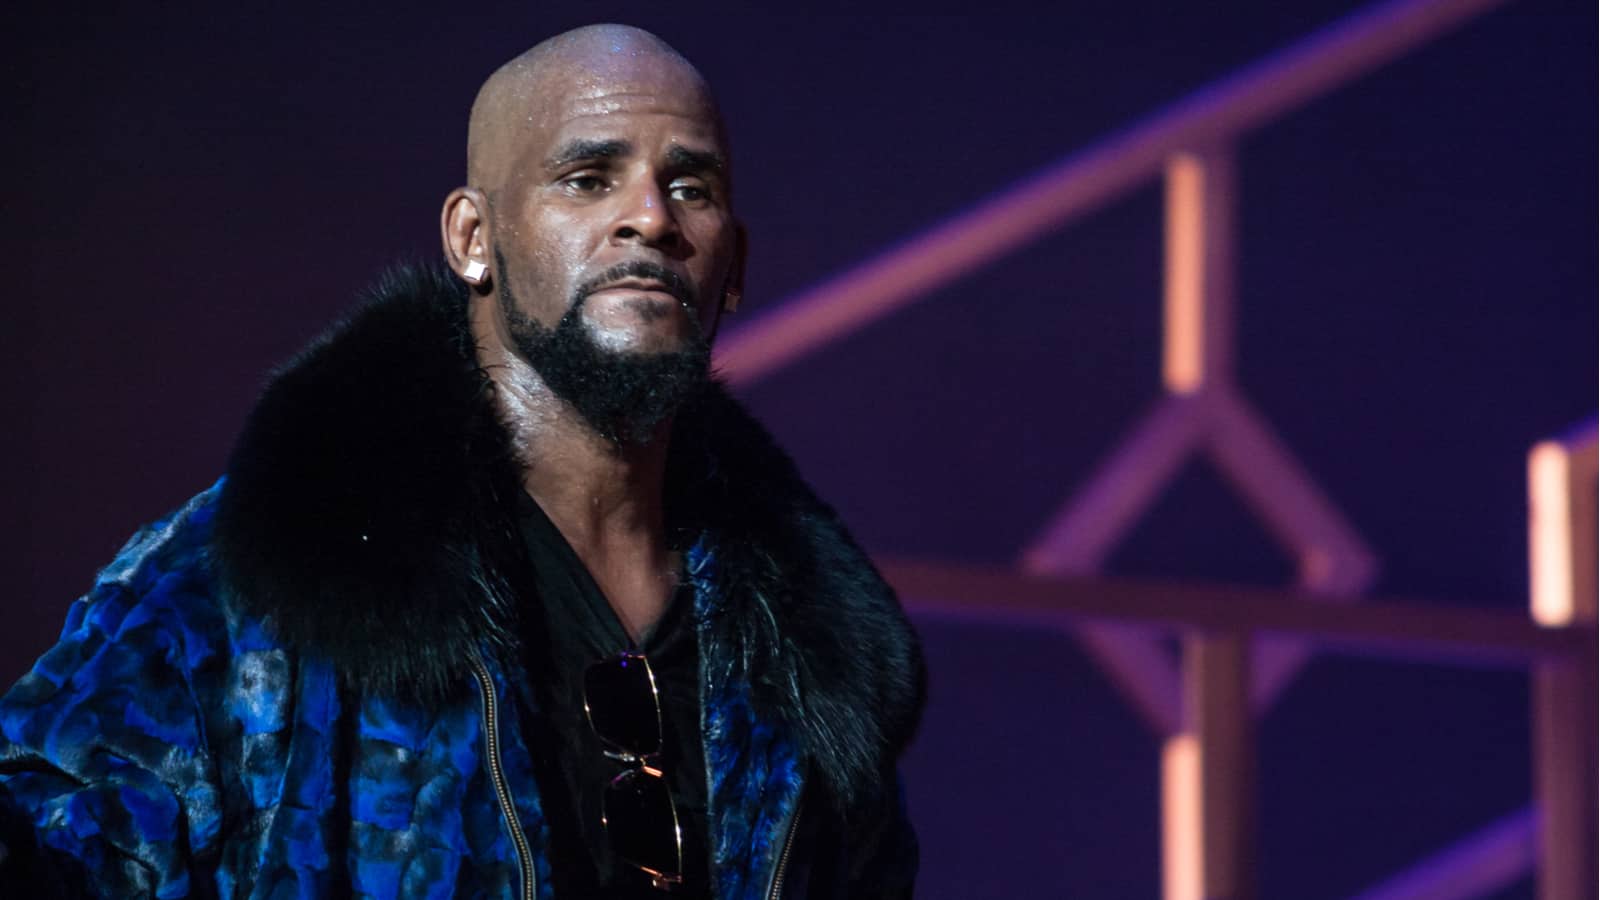 R. Kelly Dropped From Sony Music Following Lifetime Documentary